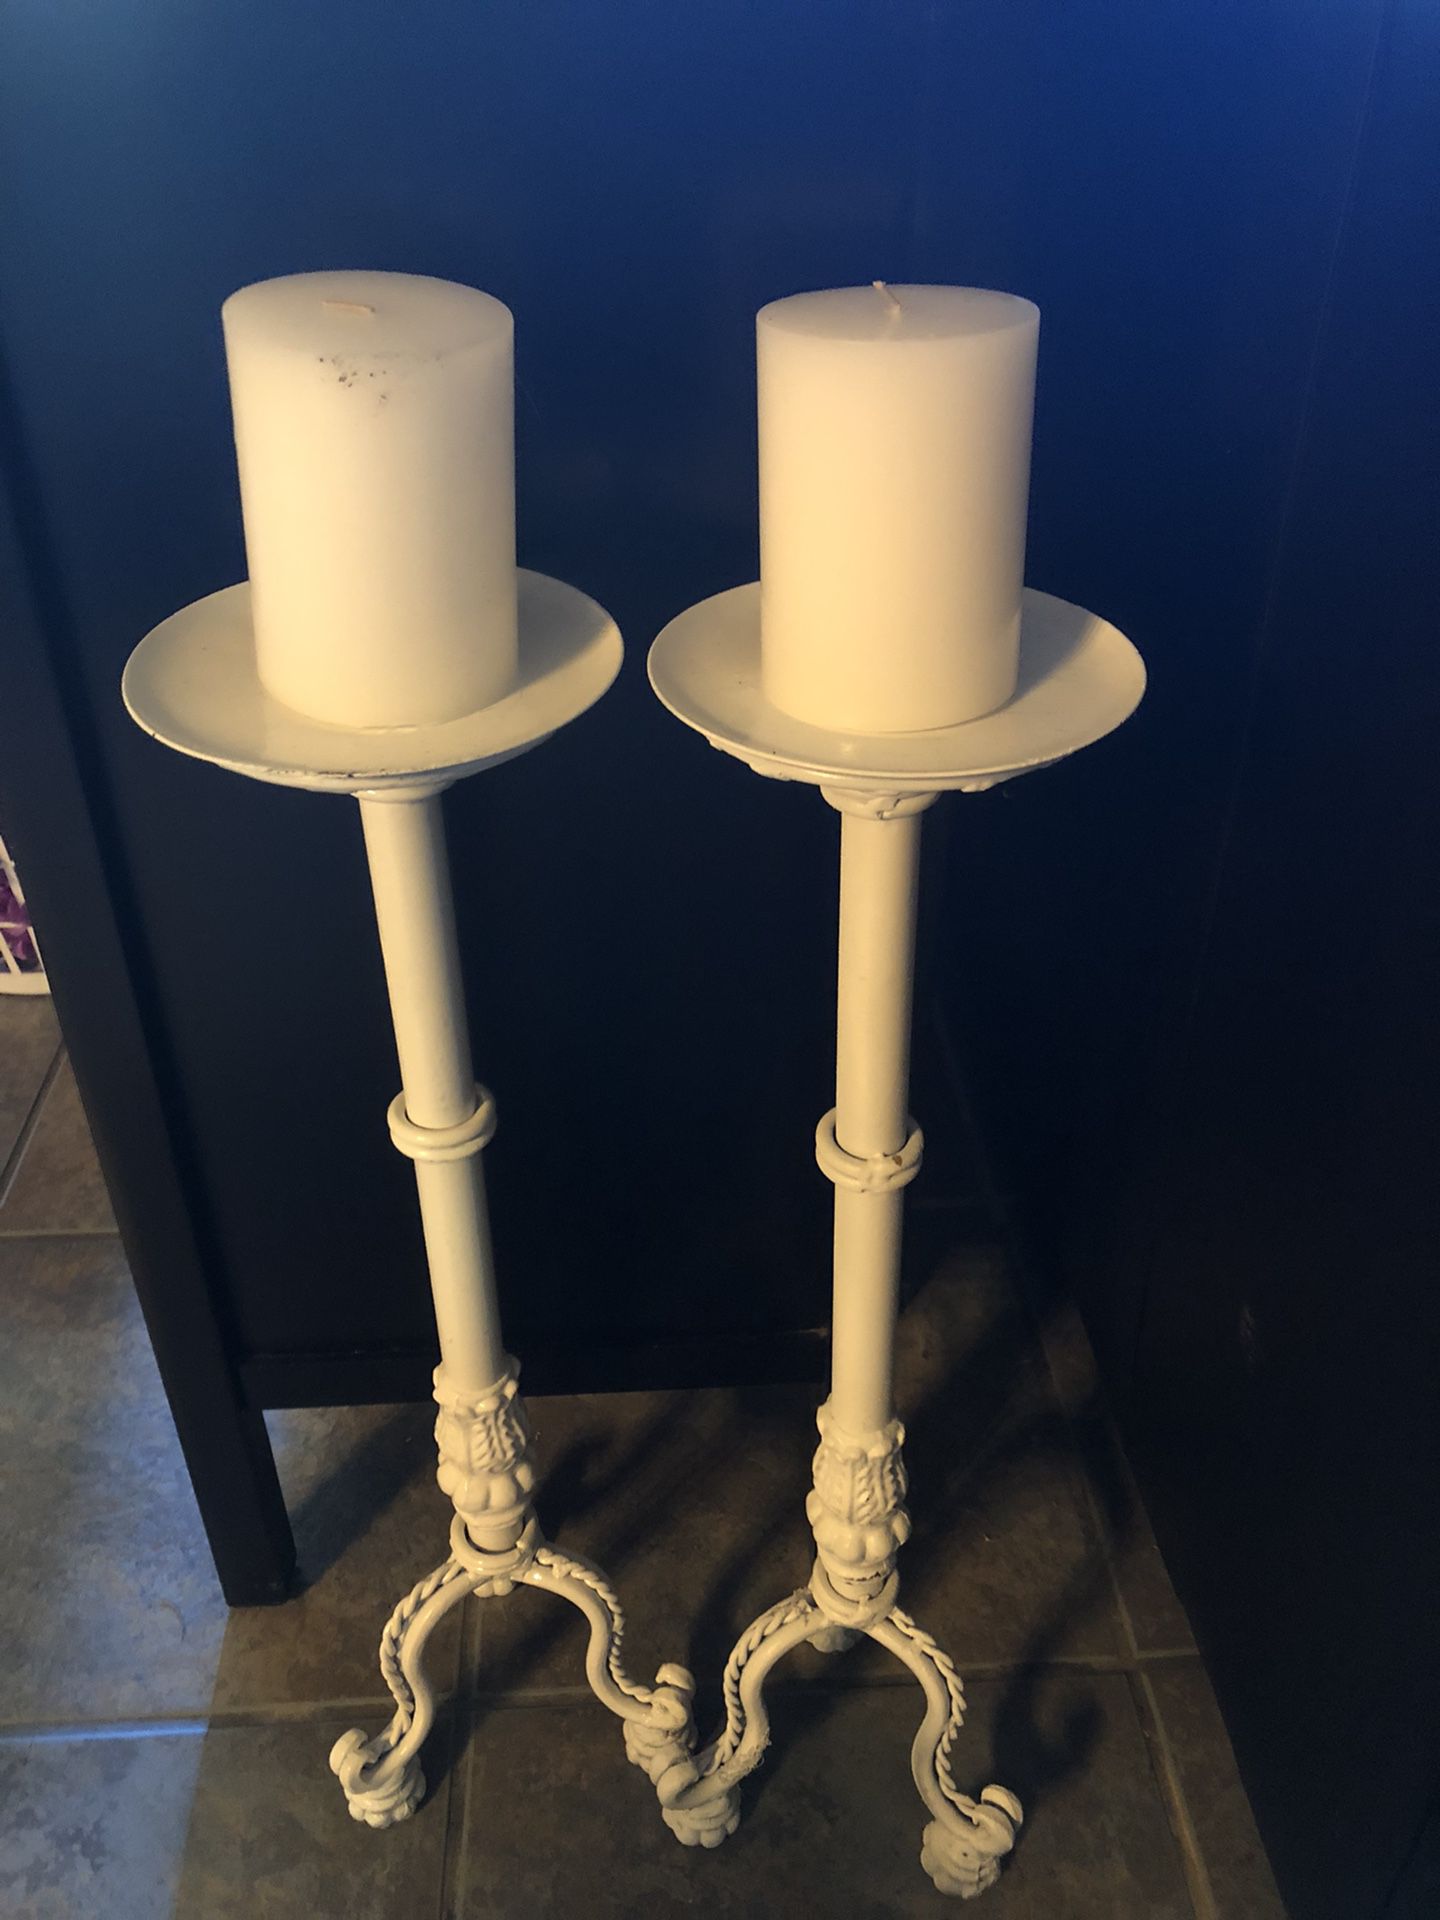 Wedding Decor: Metal Candle Holders, Pair, Thigh High Height